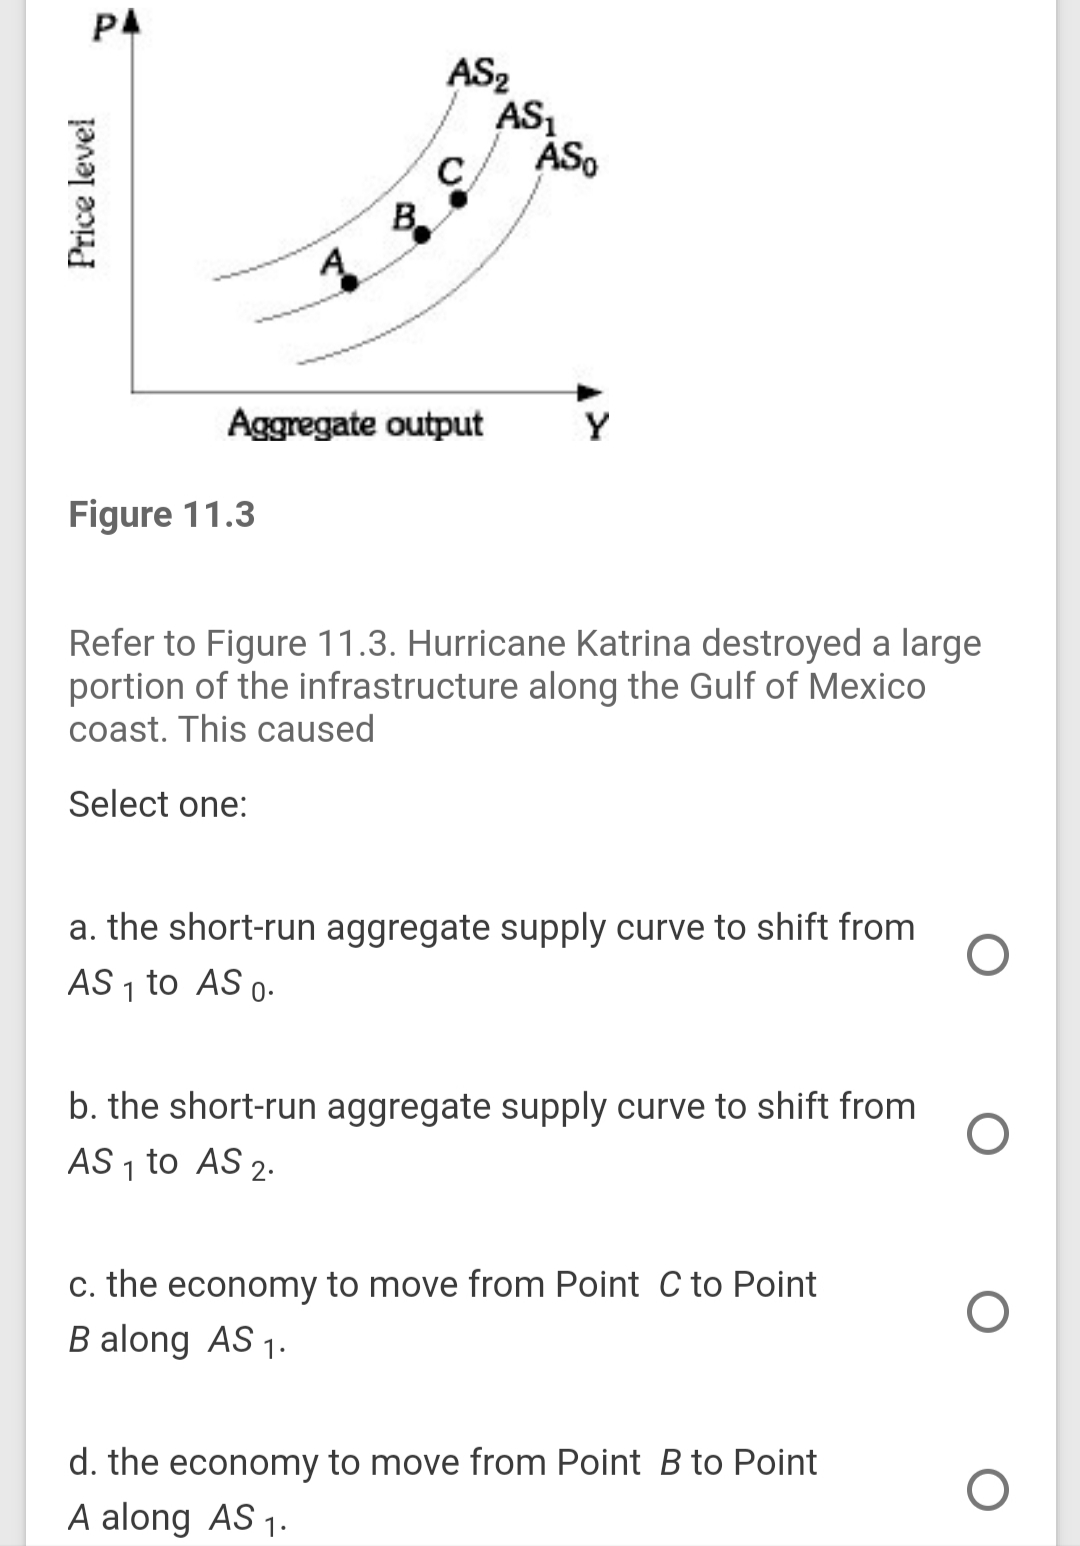 P4
AS2
AS,
Aggregate output
Y
Figure 11.3
Refer to Figure 11.3. Hurricane Katrina destroyed a large
portion of the infrastructure along the Gulf of Mexico
coast. This caused
Select one:
a. the short-run aggregate supply curve to shift from
AS 1
to AS 0-
b. the short-run aggregate supply curve to shift from
AS 1 to AS 2.
c. the economy to move from Point C to Point
B along AS 1.
d. the economy to move from Point B to Point
A along AS 1.
Price level
